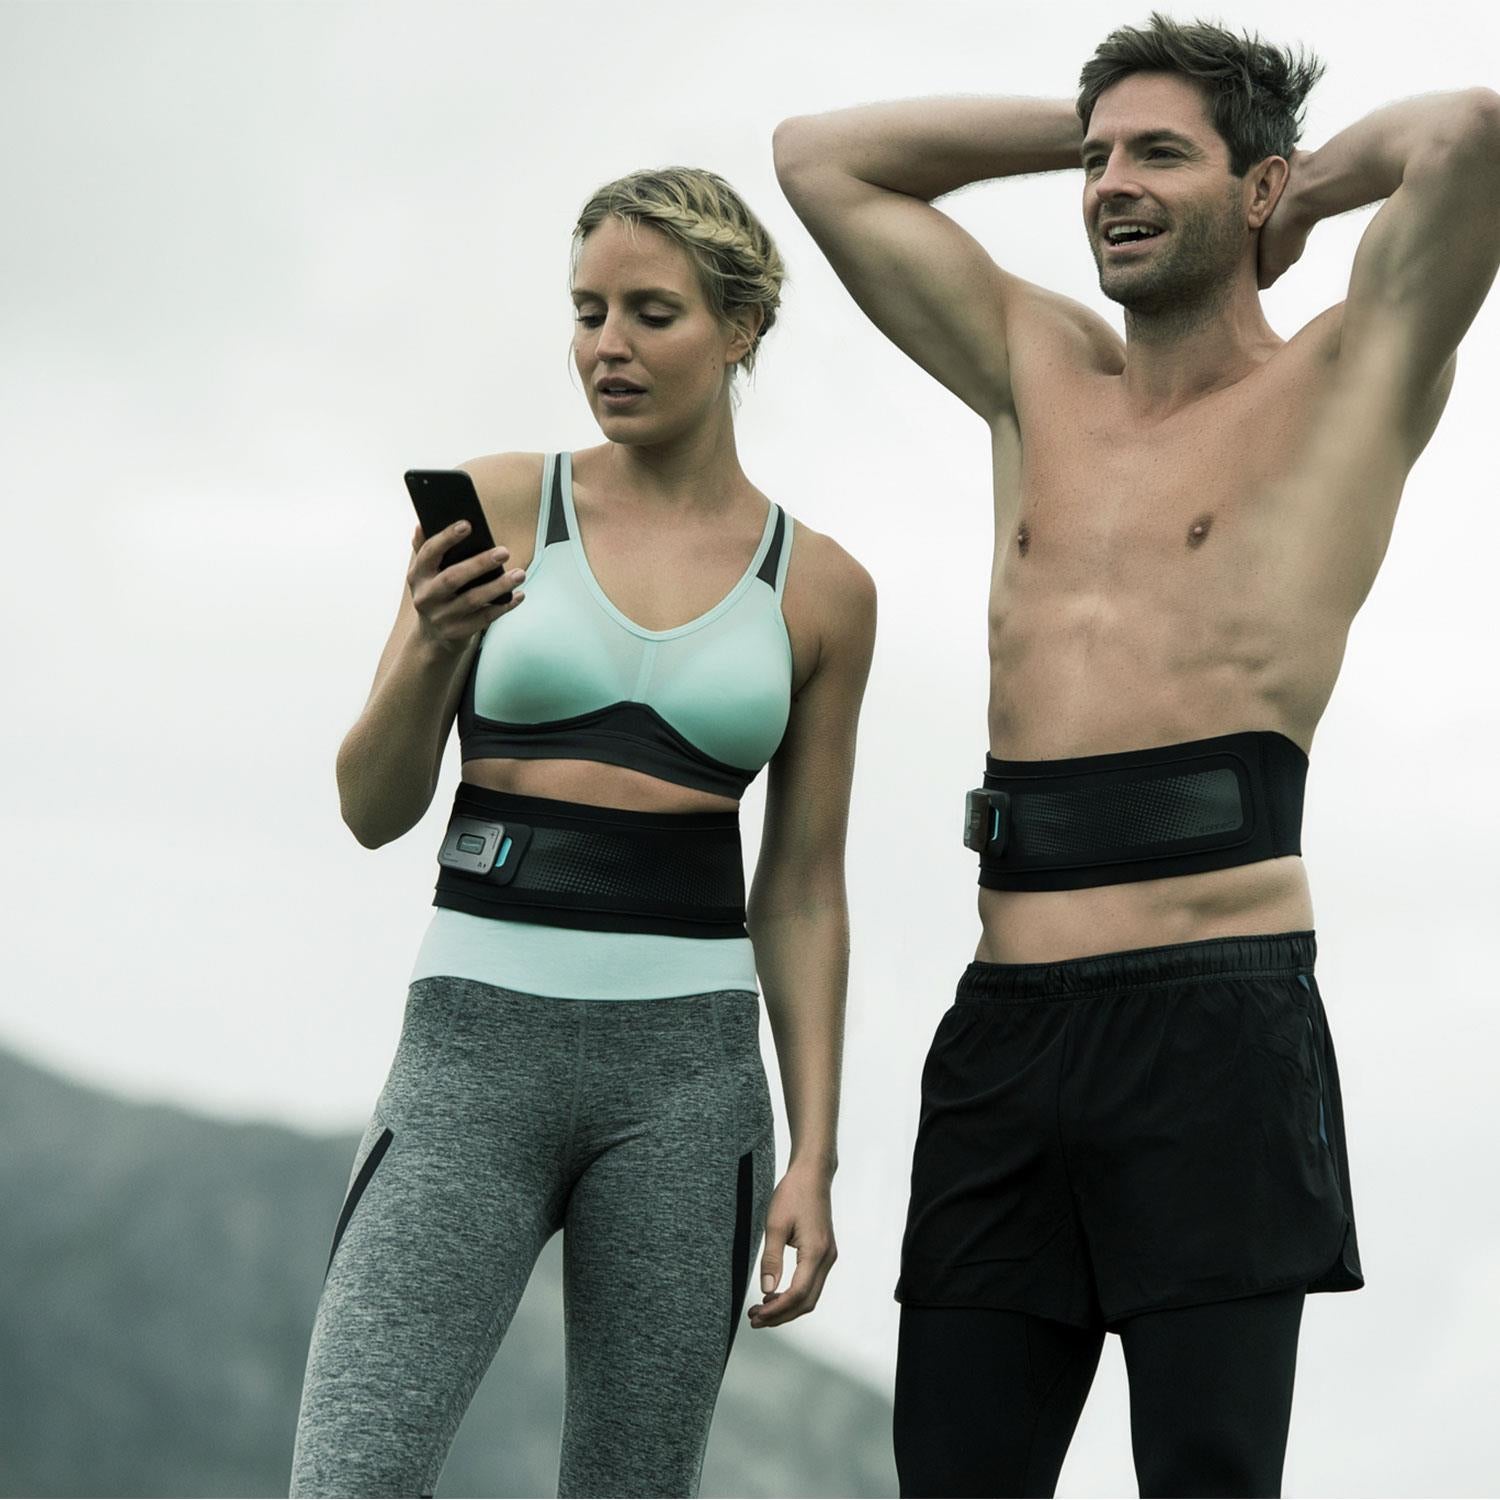 Slendertone Connect Abdominal Muscle Toner and a Giveaway